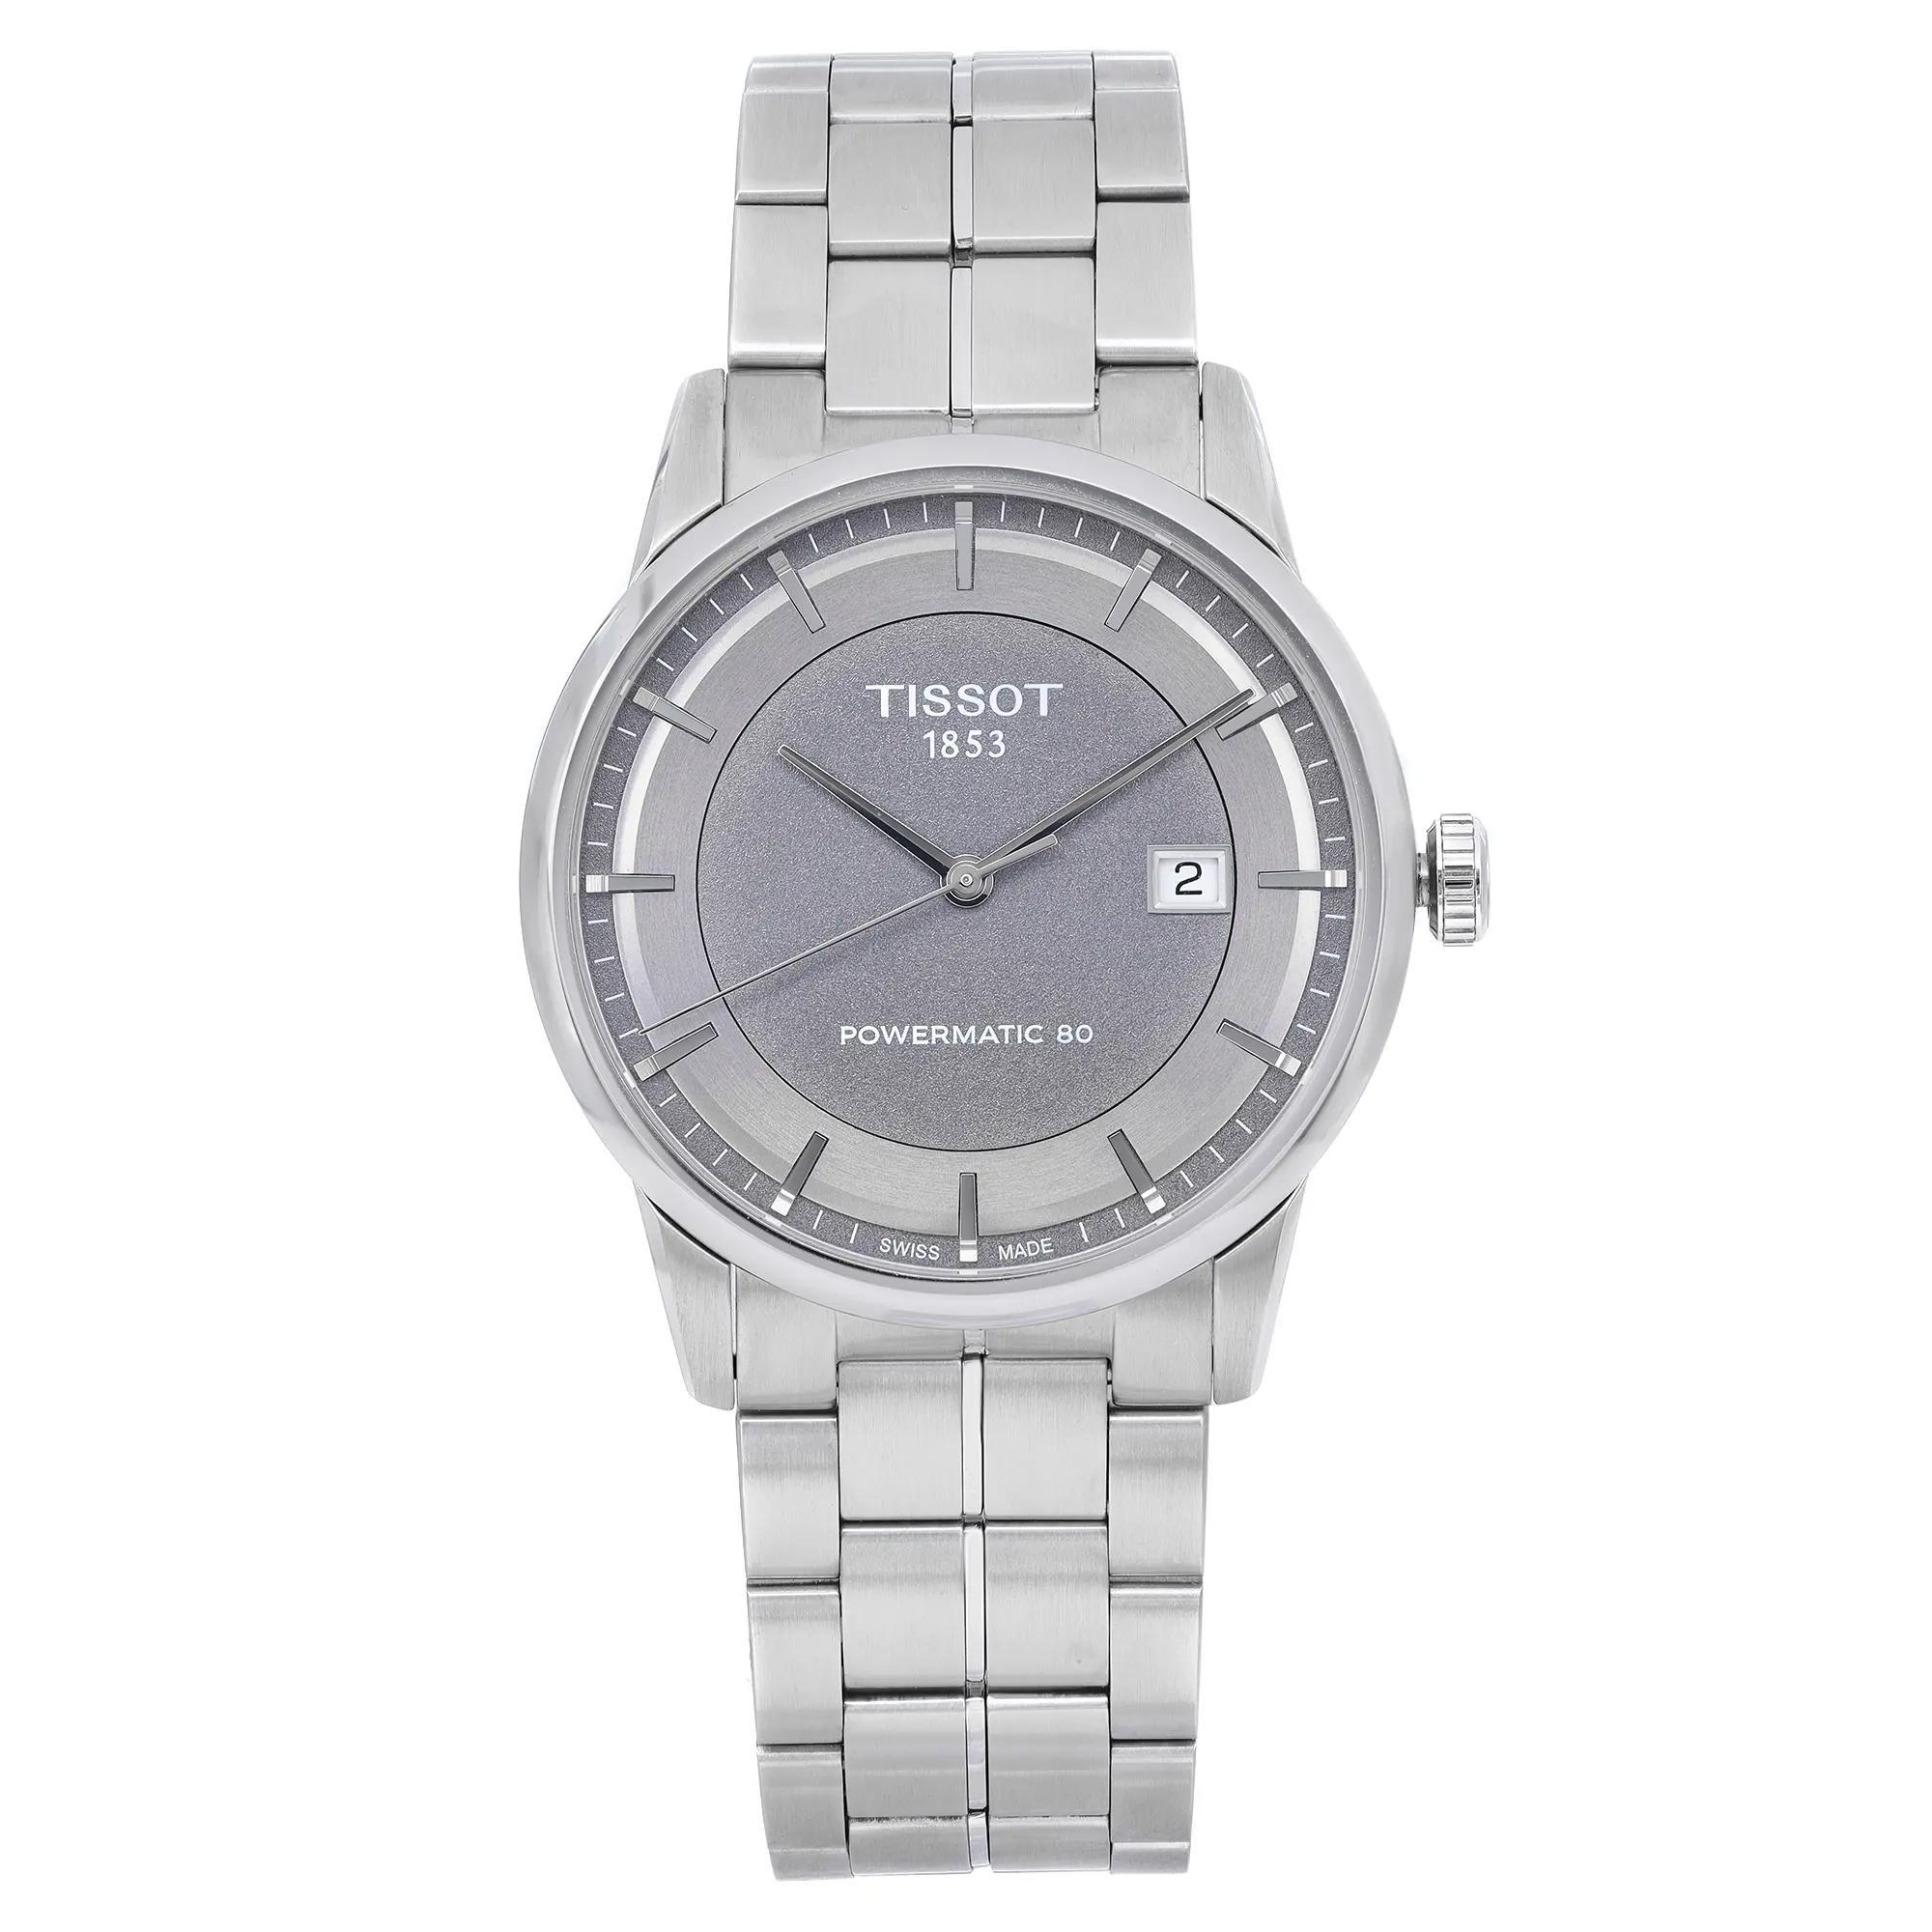 Tissot Powermatic 80 Anthracite Dial Steel Automatic Watch T086.407.11.061.00 For Sale